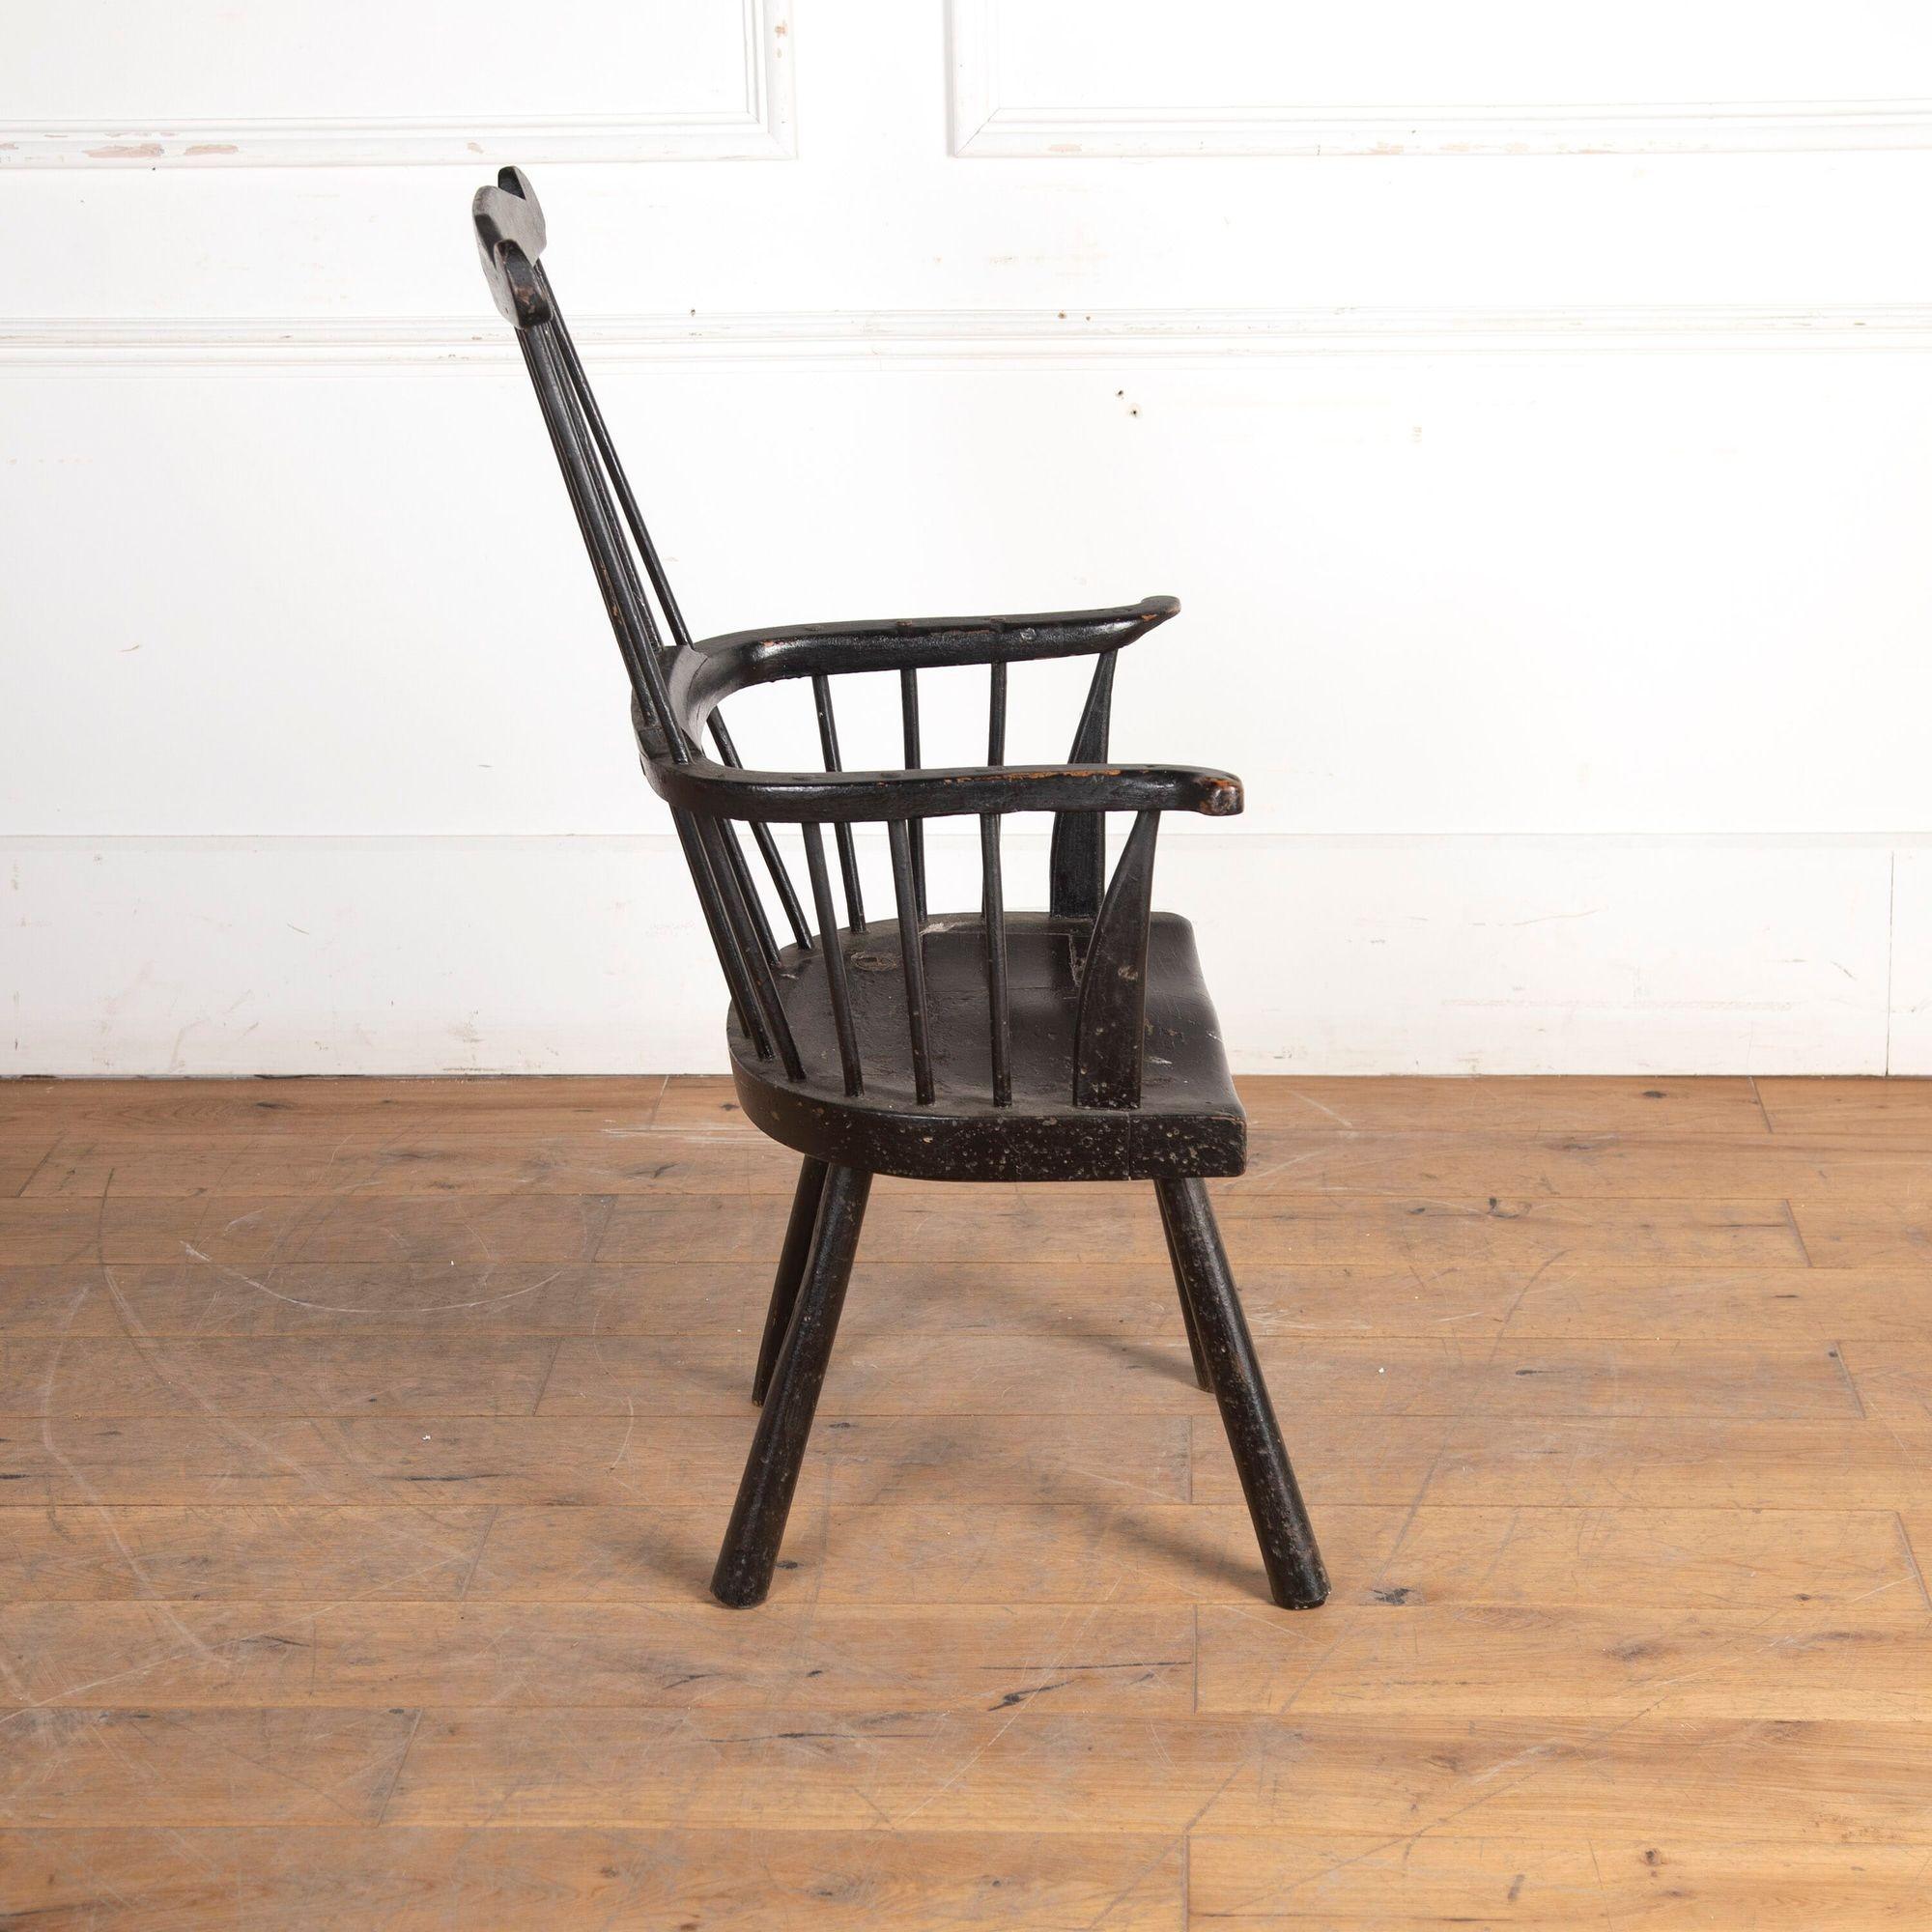 Late 18th Century Welsh Comb-Back Stick Chair 1